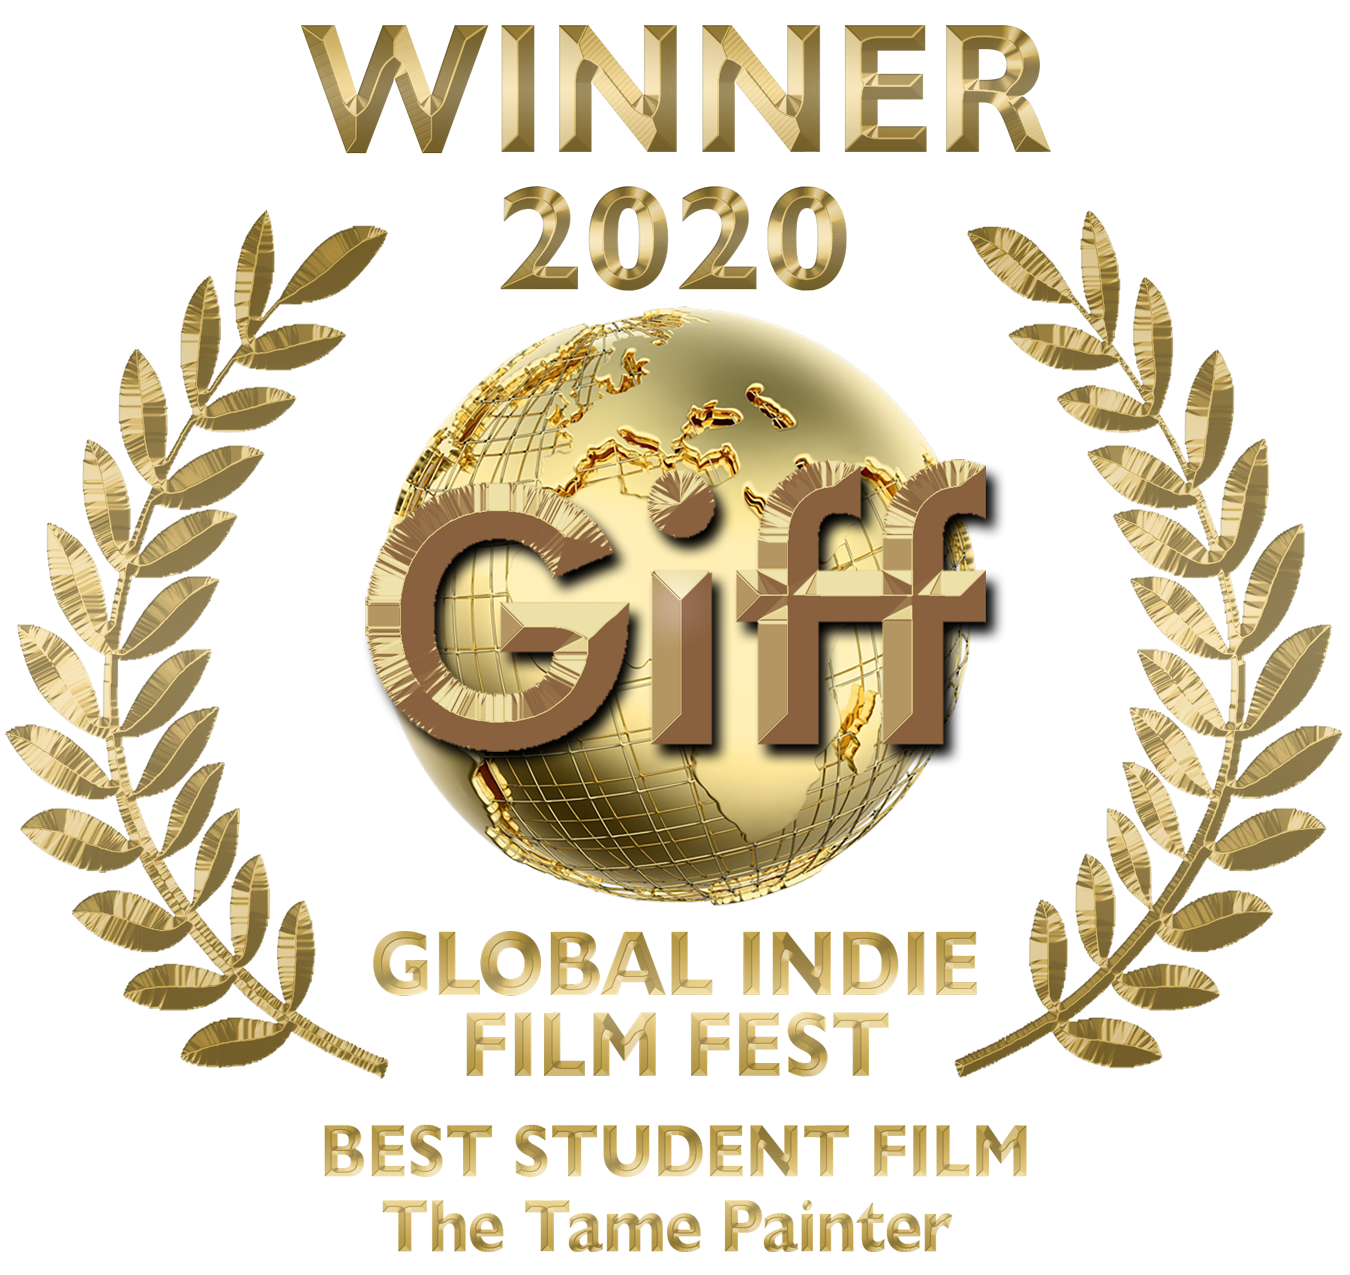 //gifilmfest.com/wp-content/uploads/2021/04/Giff-Gold-Award-Student.png